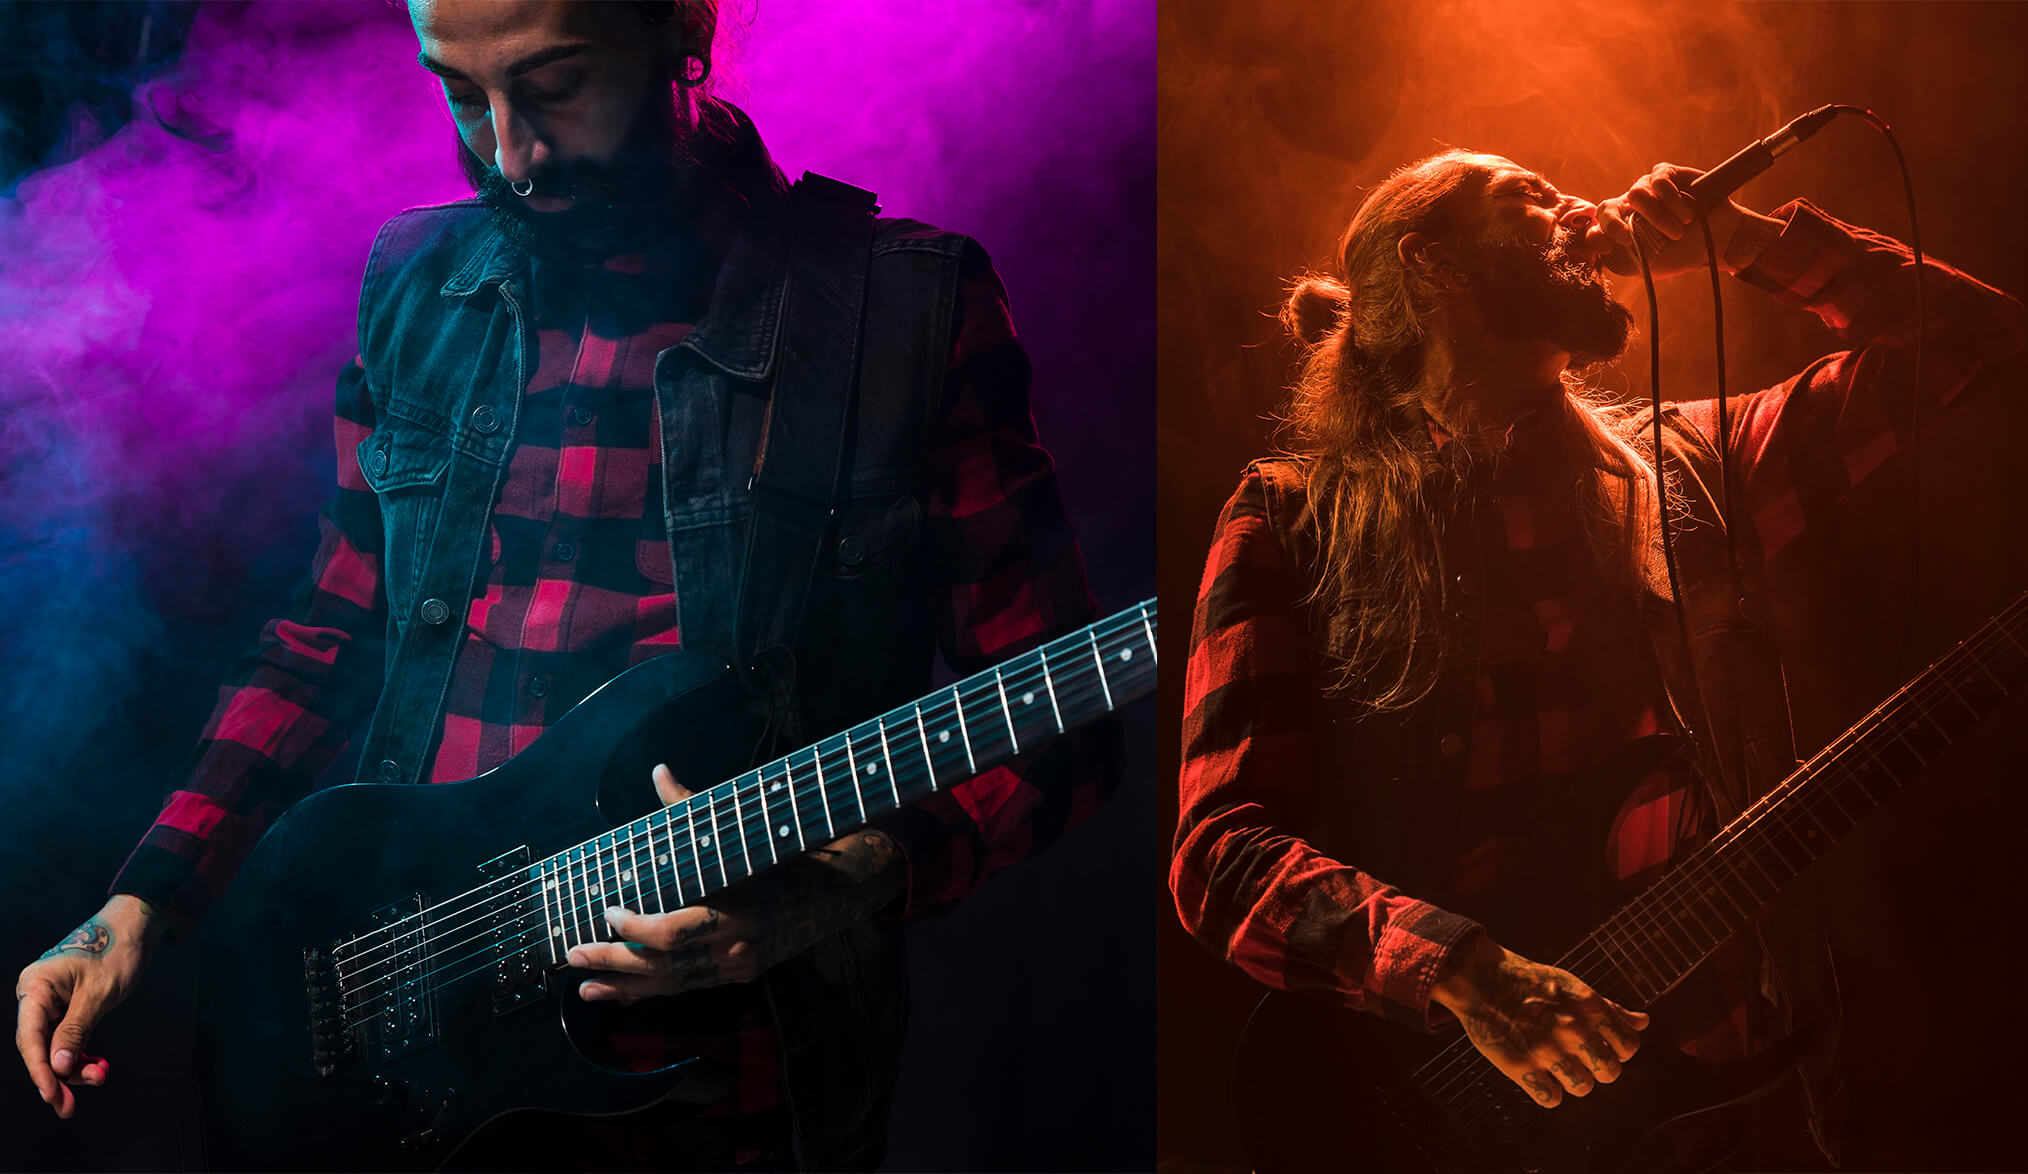 The Best Tips and Techniques for Shooting Band photography